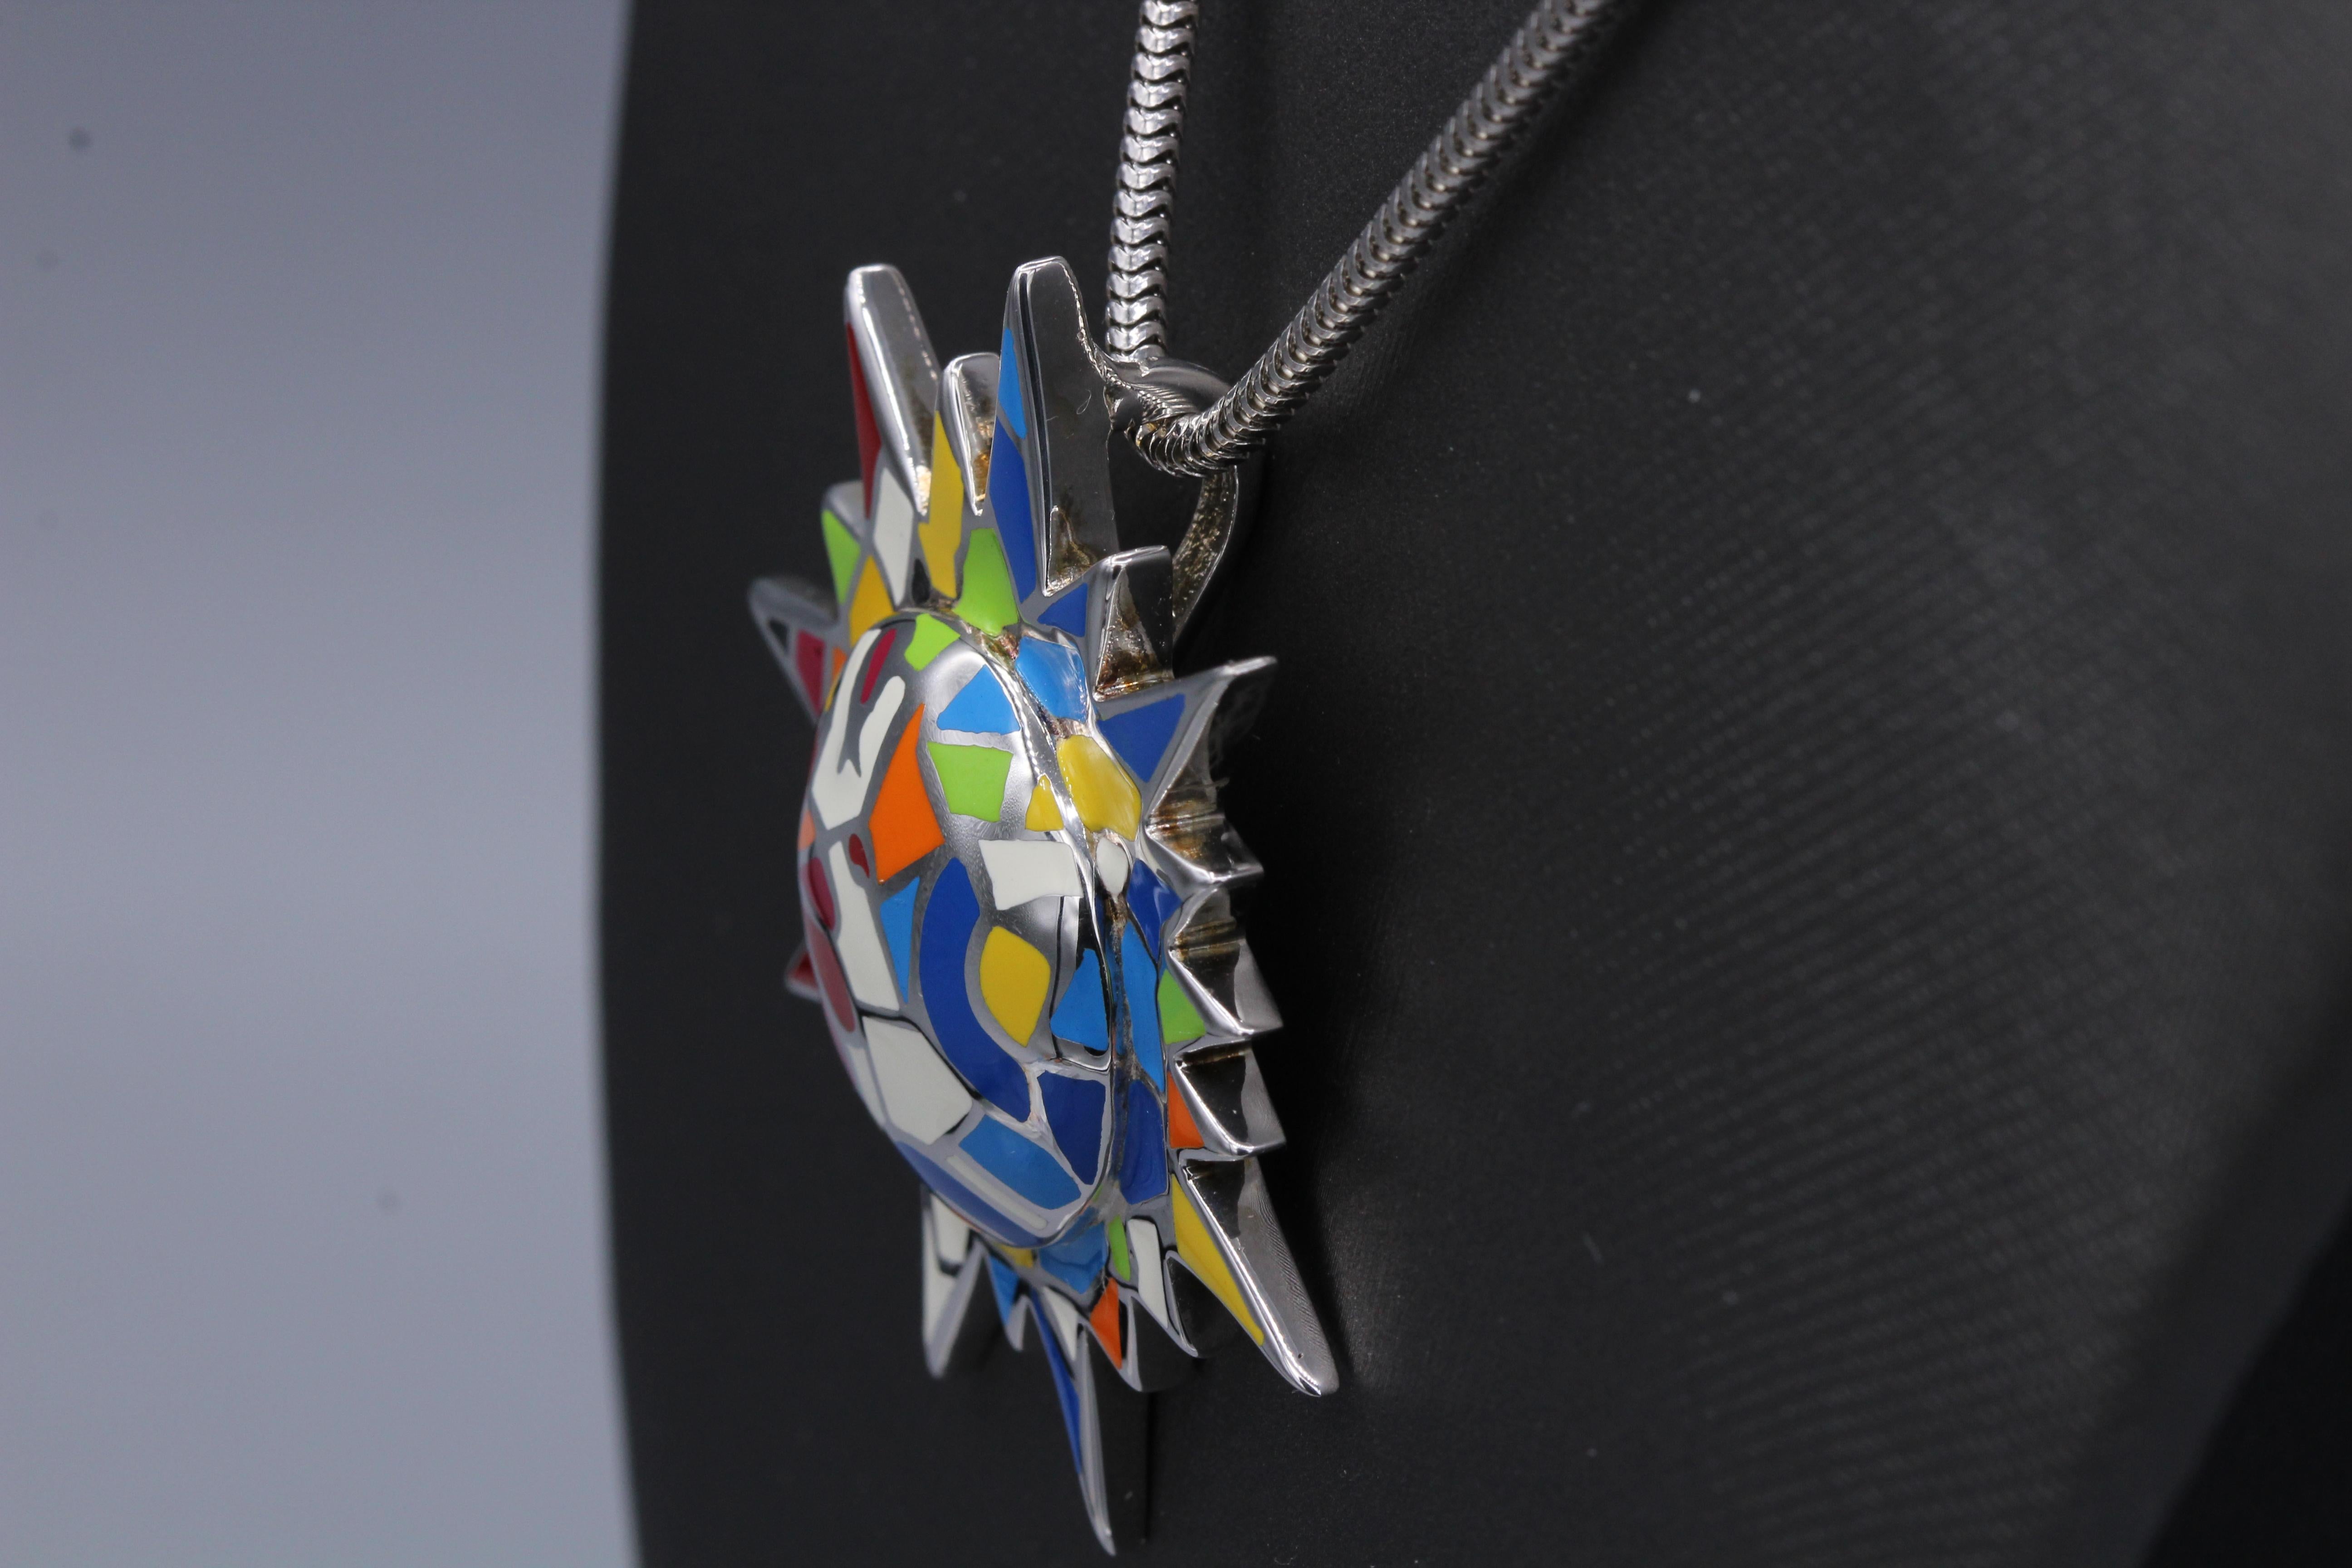 Unique  & beautiful Art Jewelry
Quality made Enamel Art Replica Pendant 
Inspired from famous artist.
Sterling Silver 925 - Hand Made in Italy
Approx. size 50 mm ( 2' Inch)
Slight Imperfections may exist due to Manufacturing process
Highly skilled